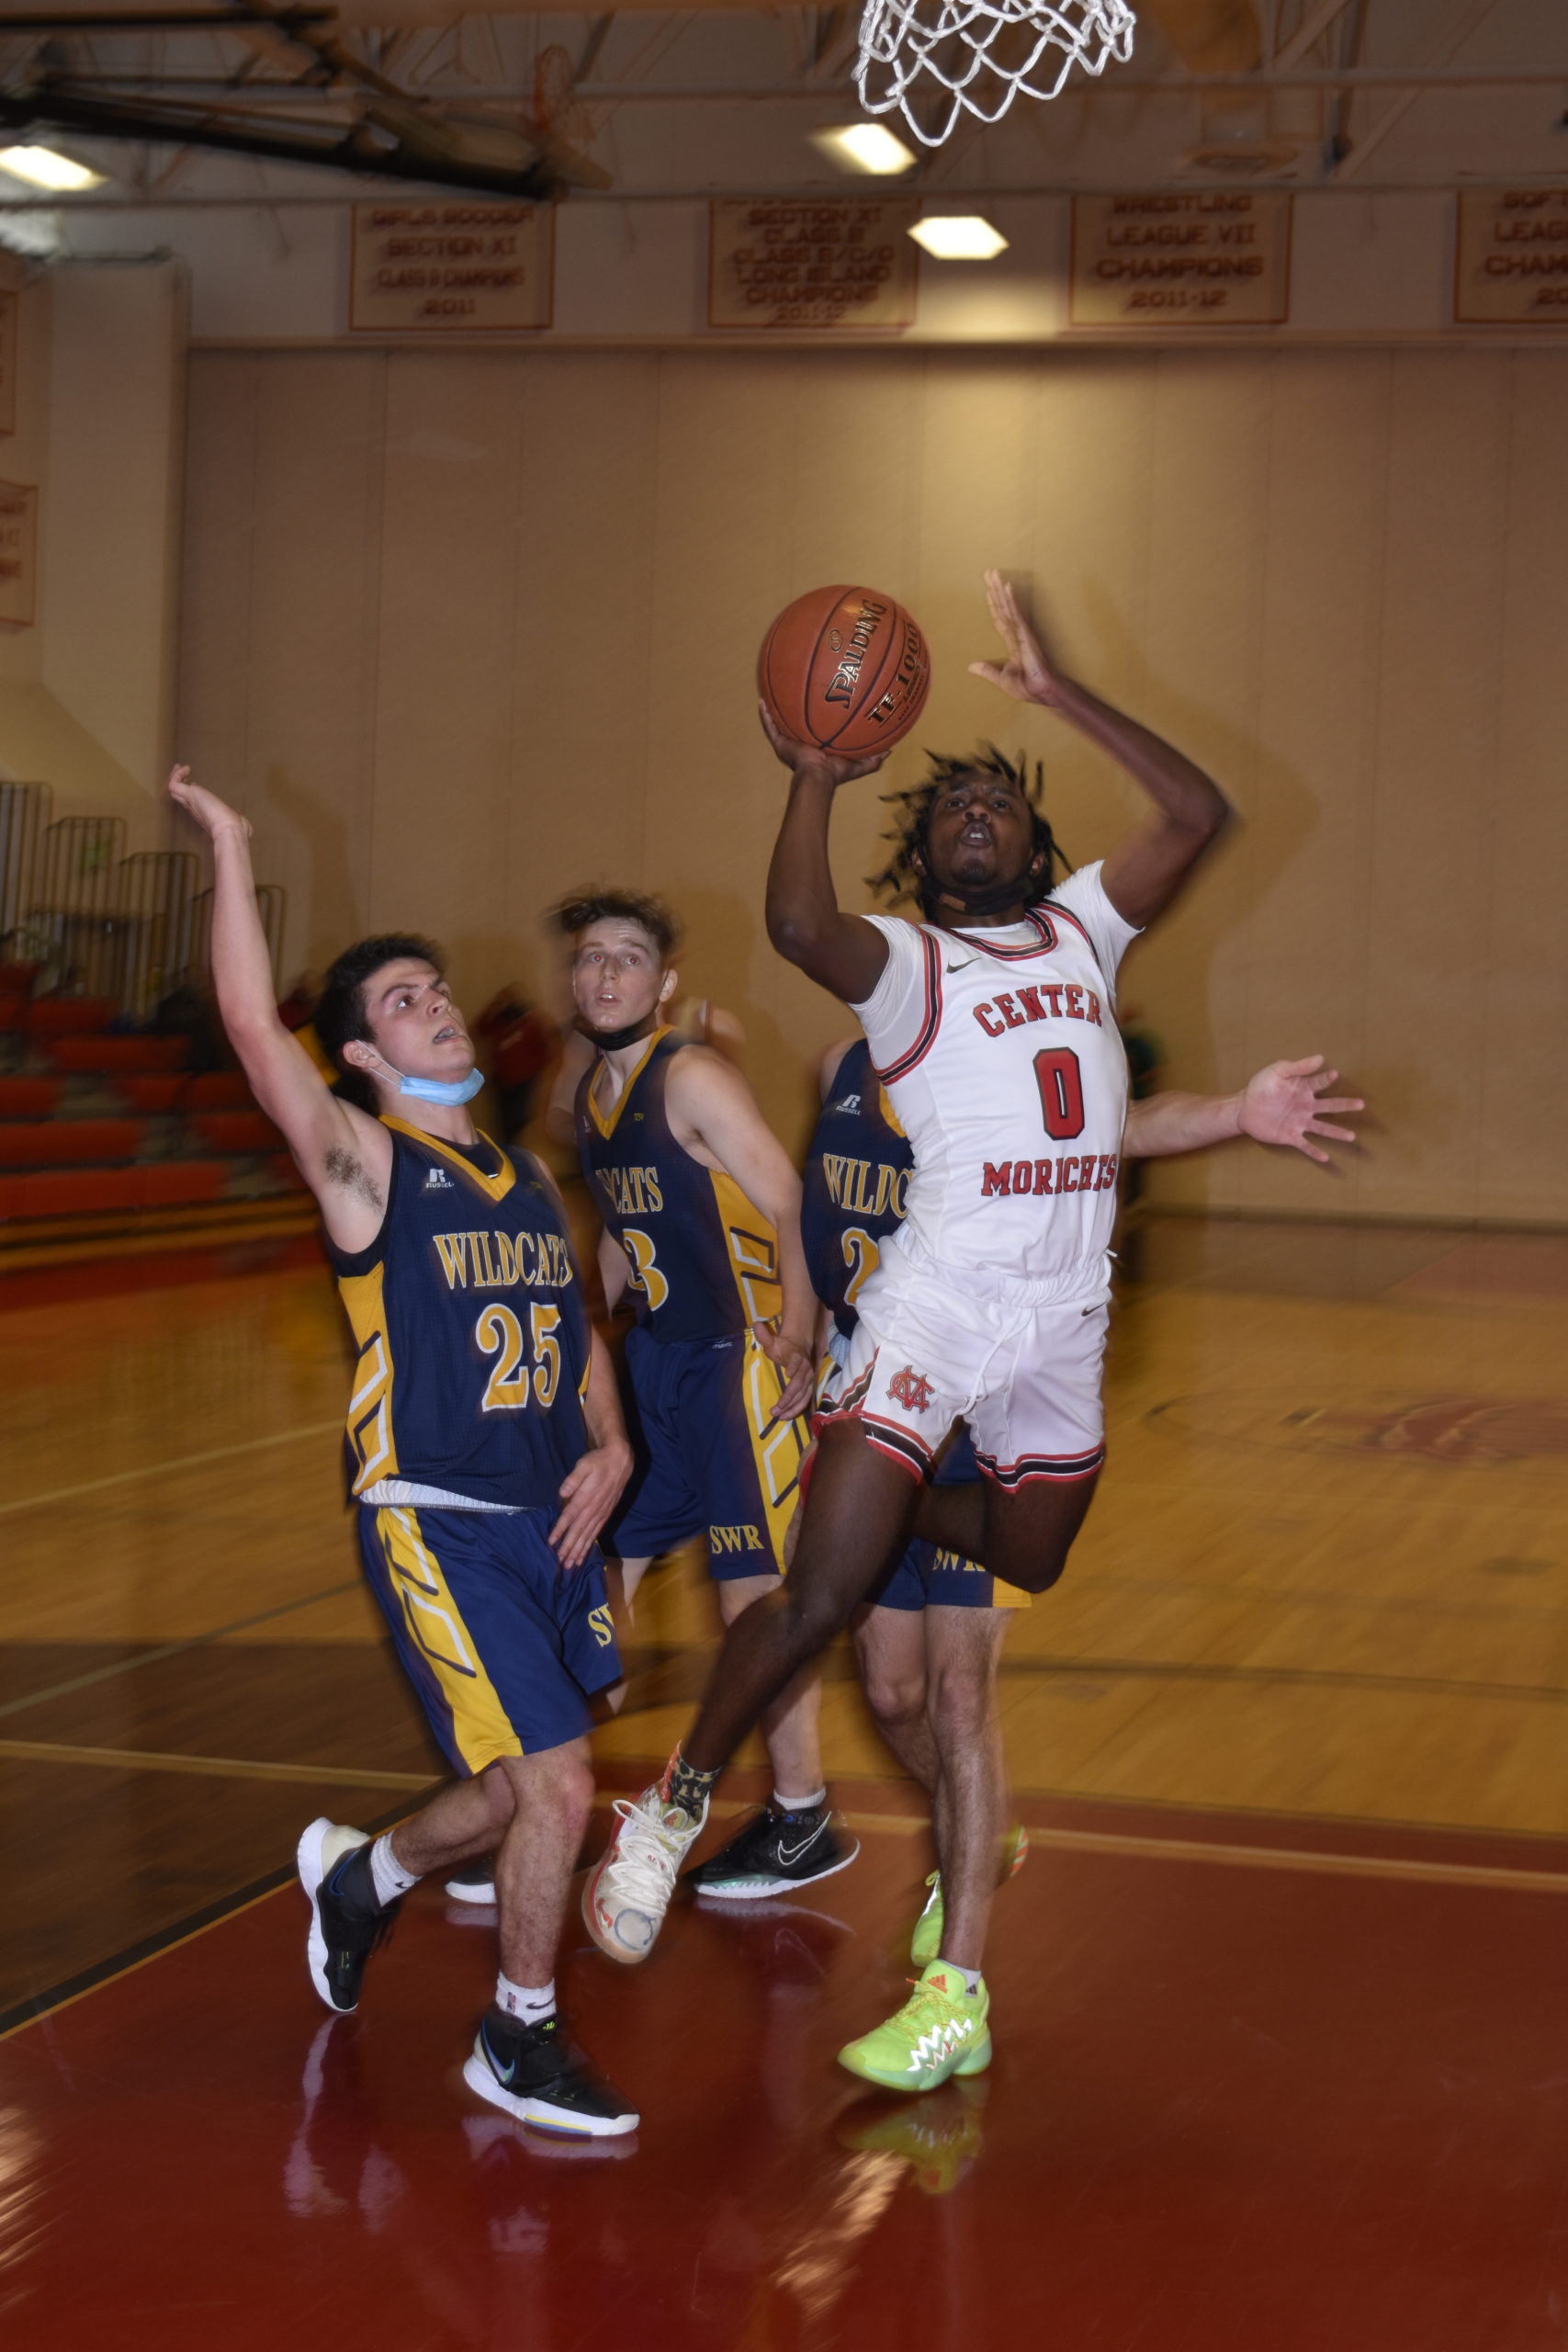 Center Moriches senior Dayrien Franklin scored a team-high 20 points in Sunday's victory.